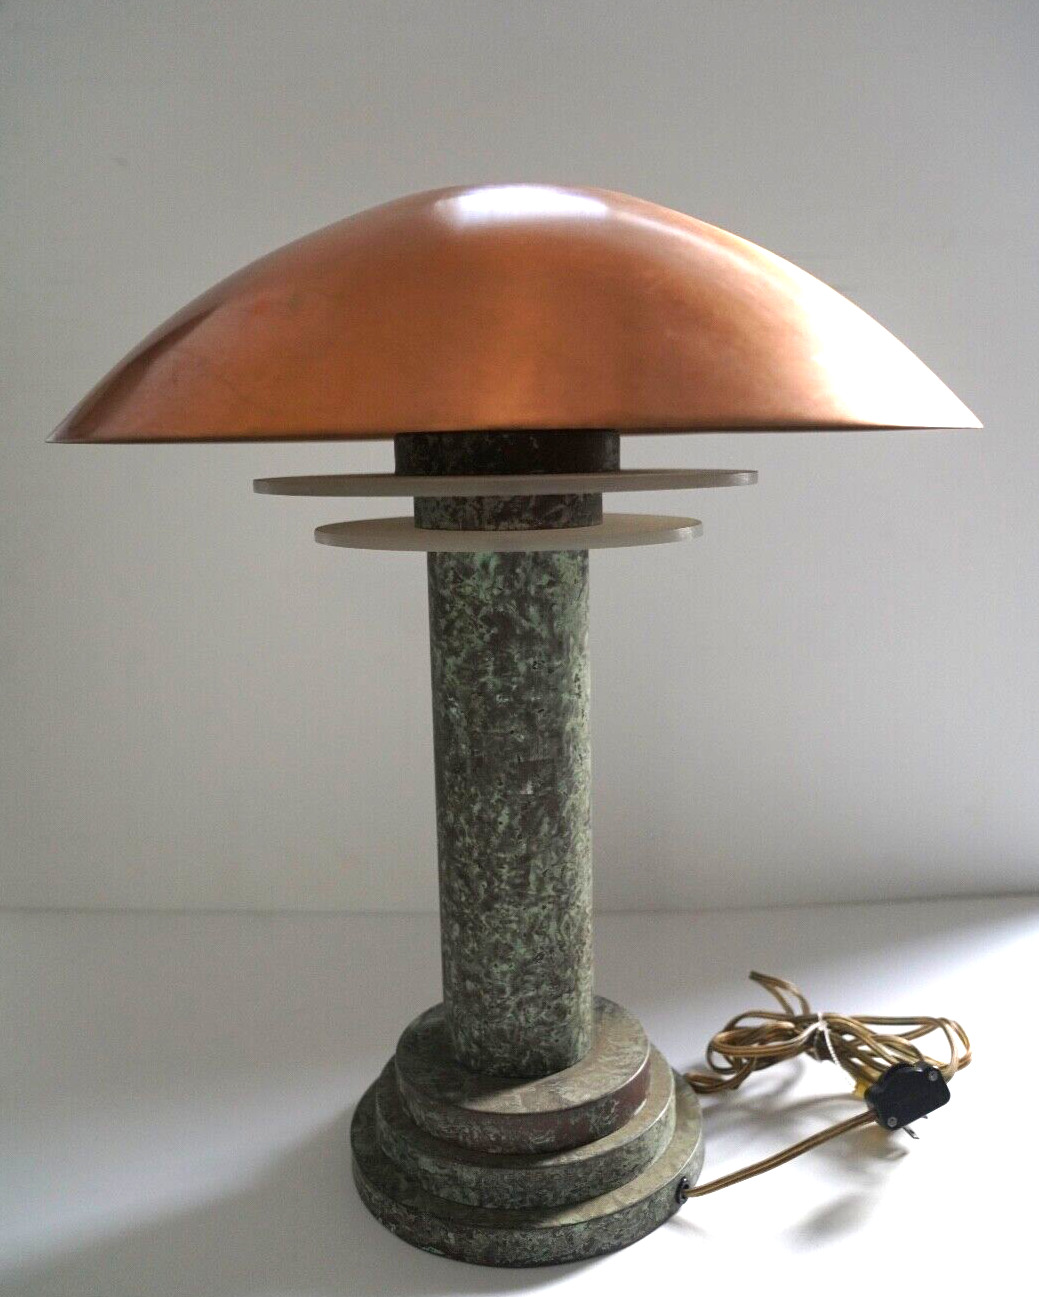 Vintage Hollywood Movie Prop Lamp - Art Deco Industrial Lighting W/ Copper Shade